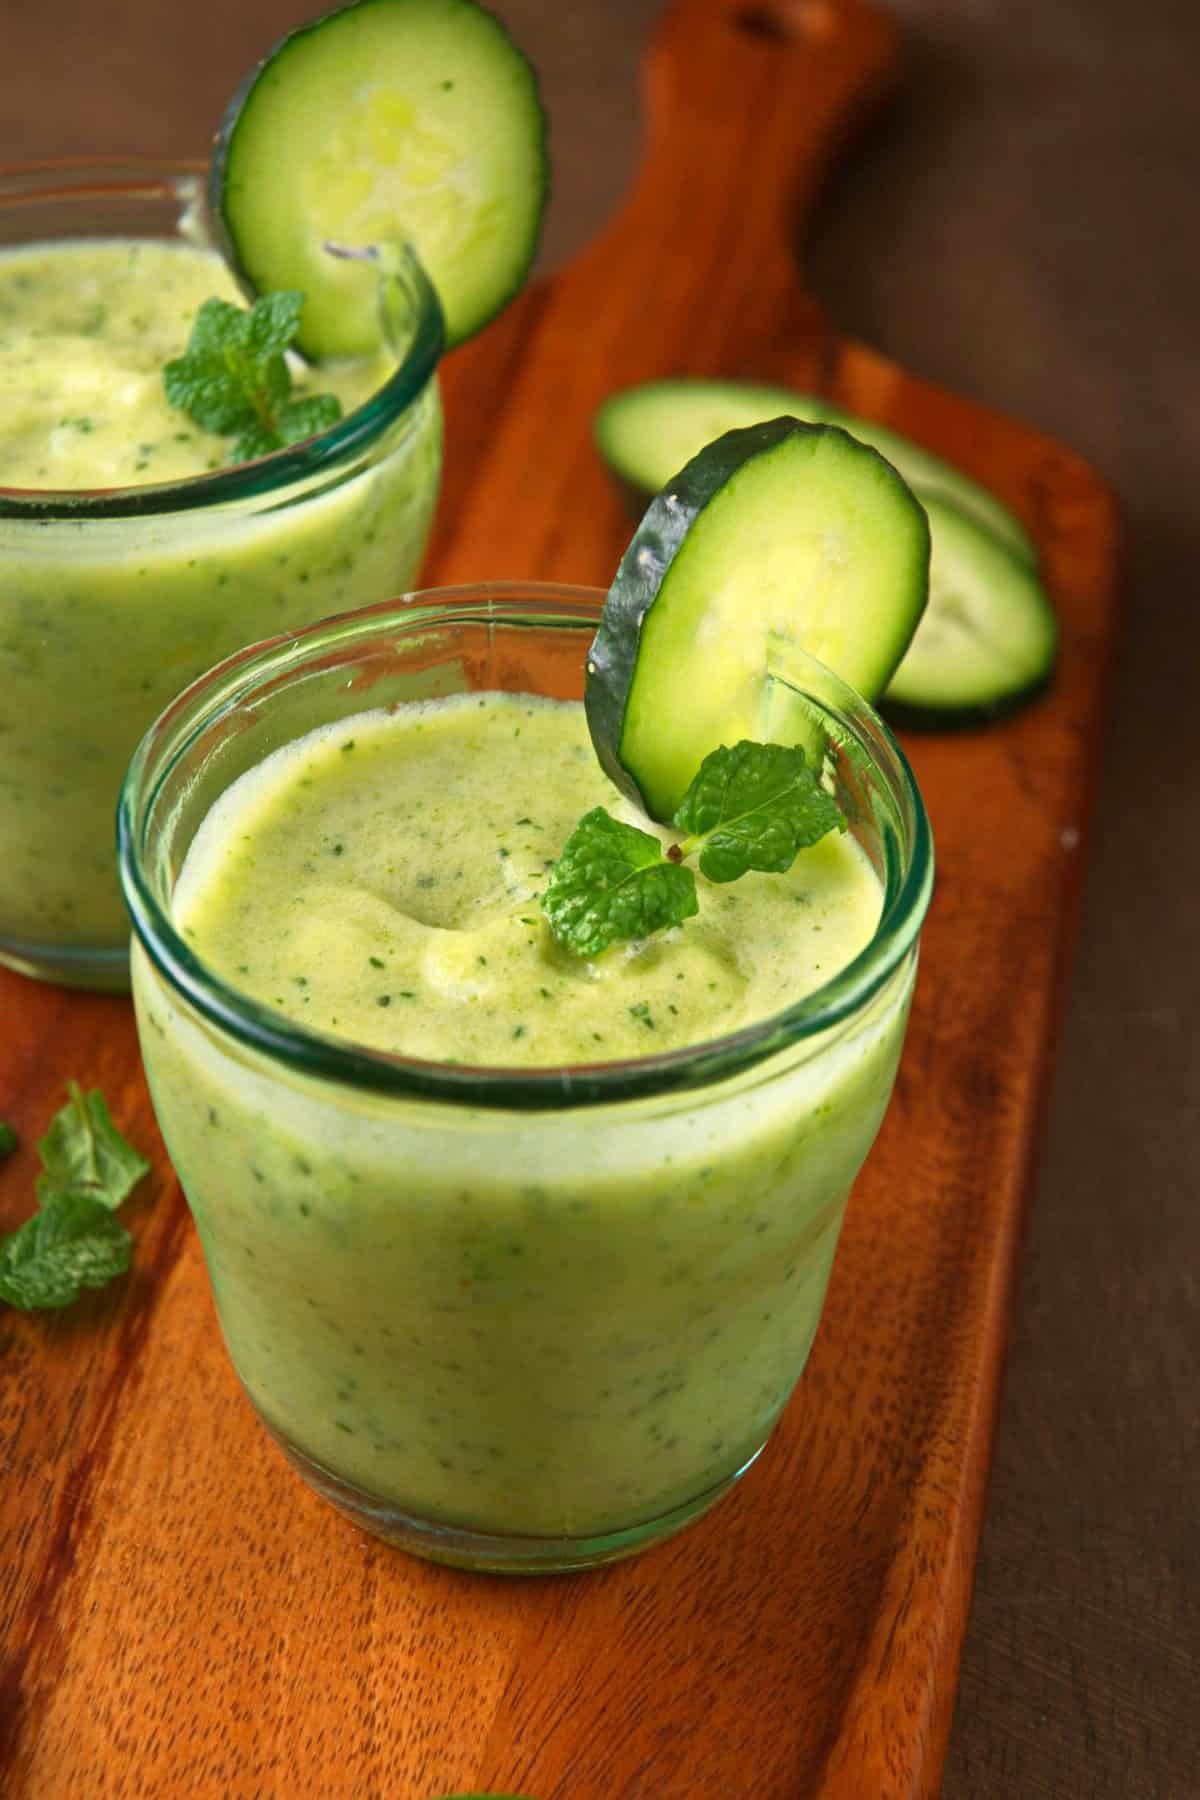 Cucumber smoothie in glasses on wooden board.